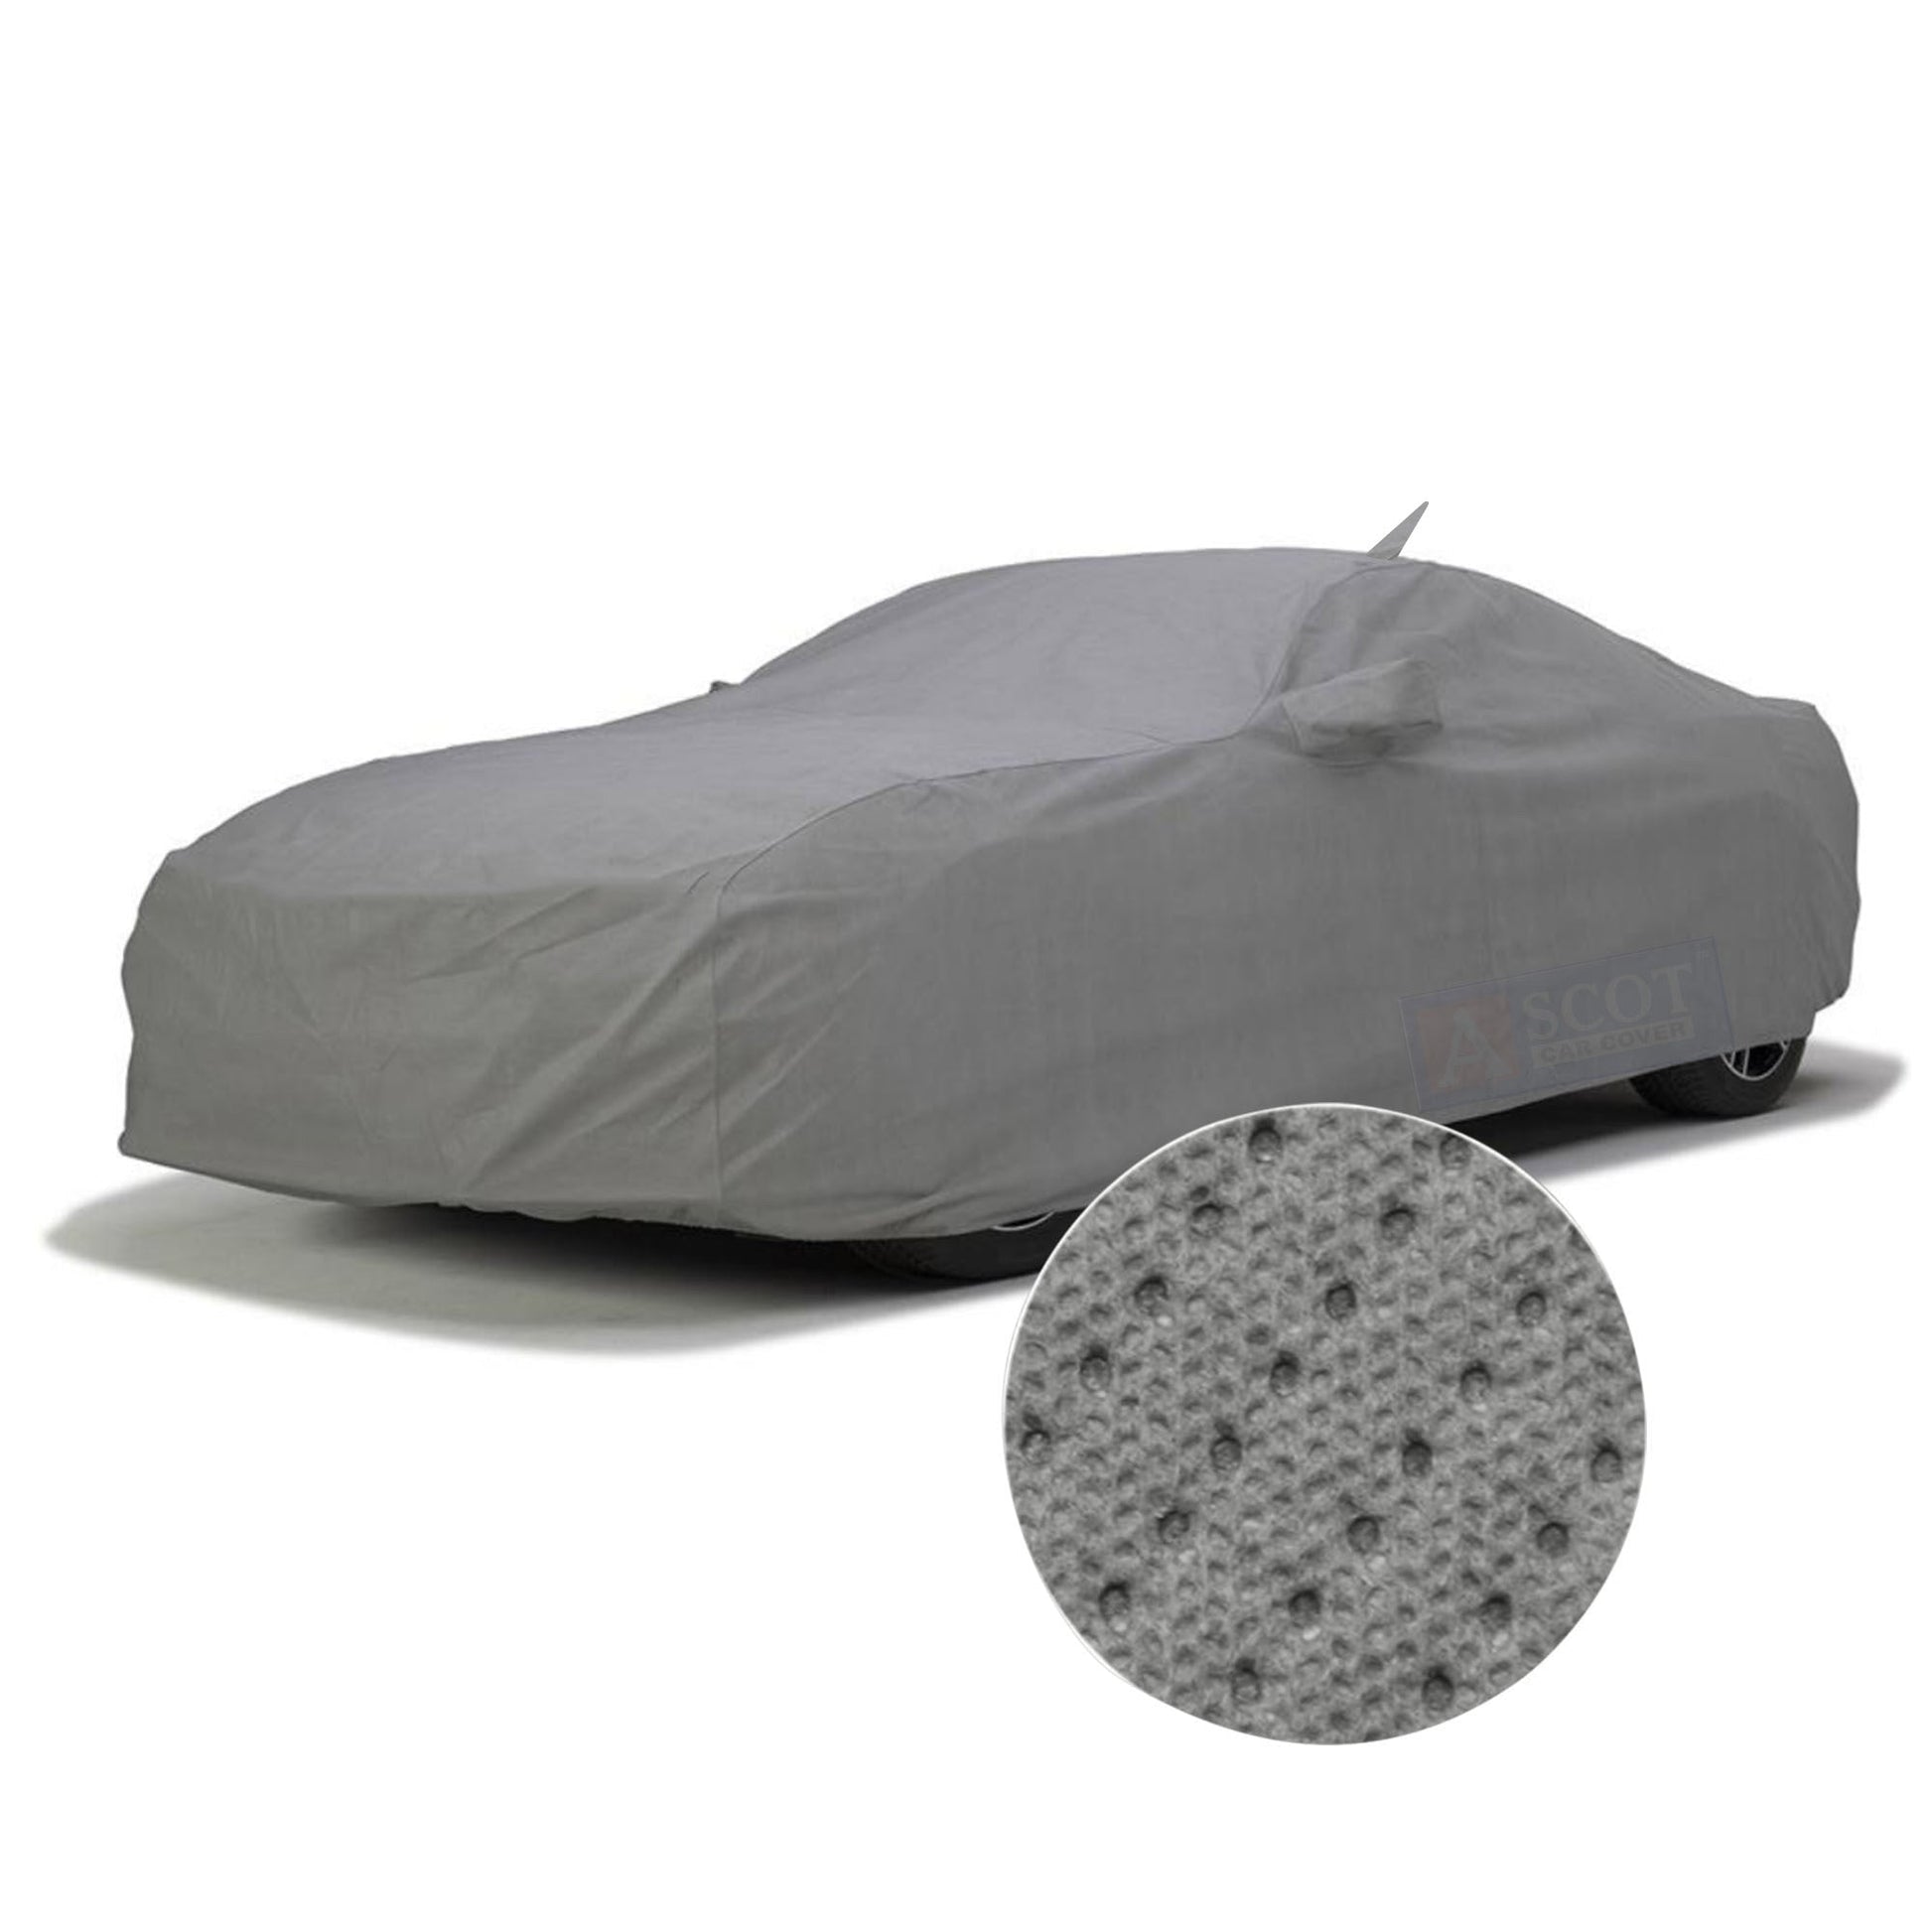 Sedan Car Covered with Grey Waterproof Car Cover with a zoom fabric image